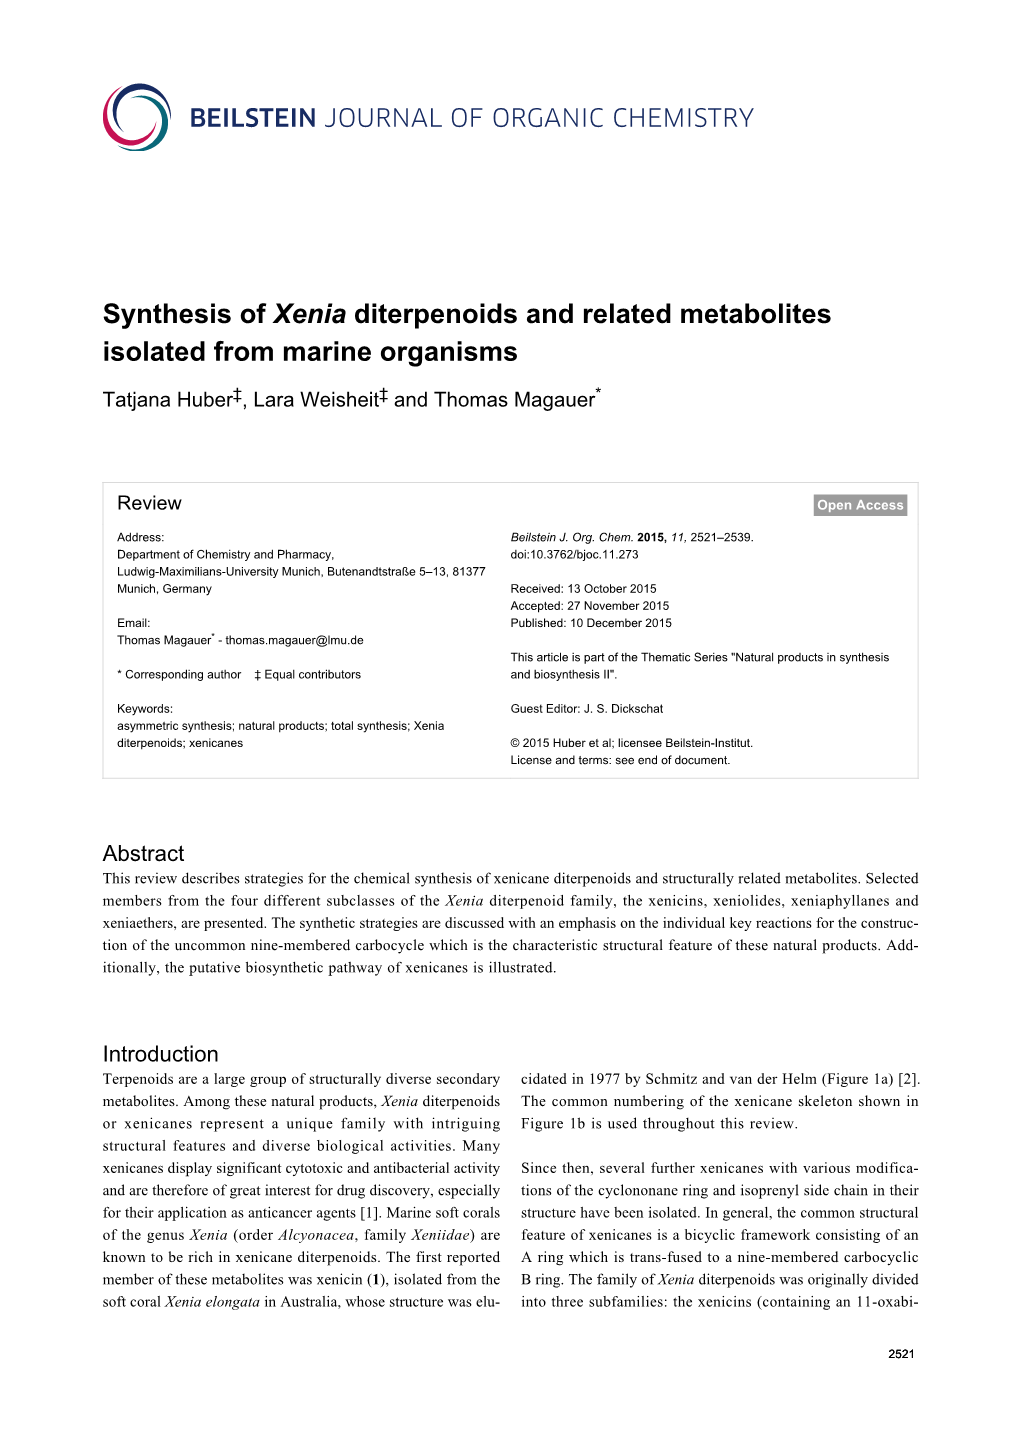 Synthesis of Xenia Diterpenoids and Related Metabolites Isolated from Marine Organisms